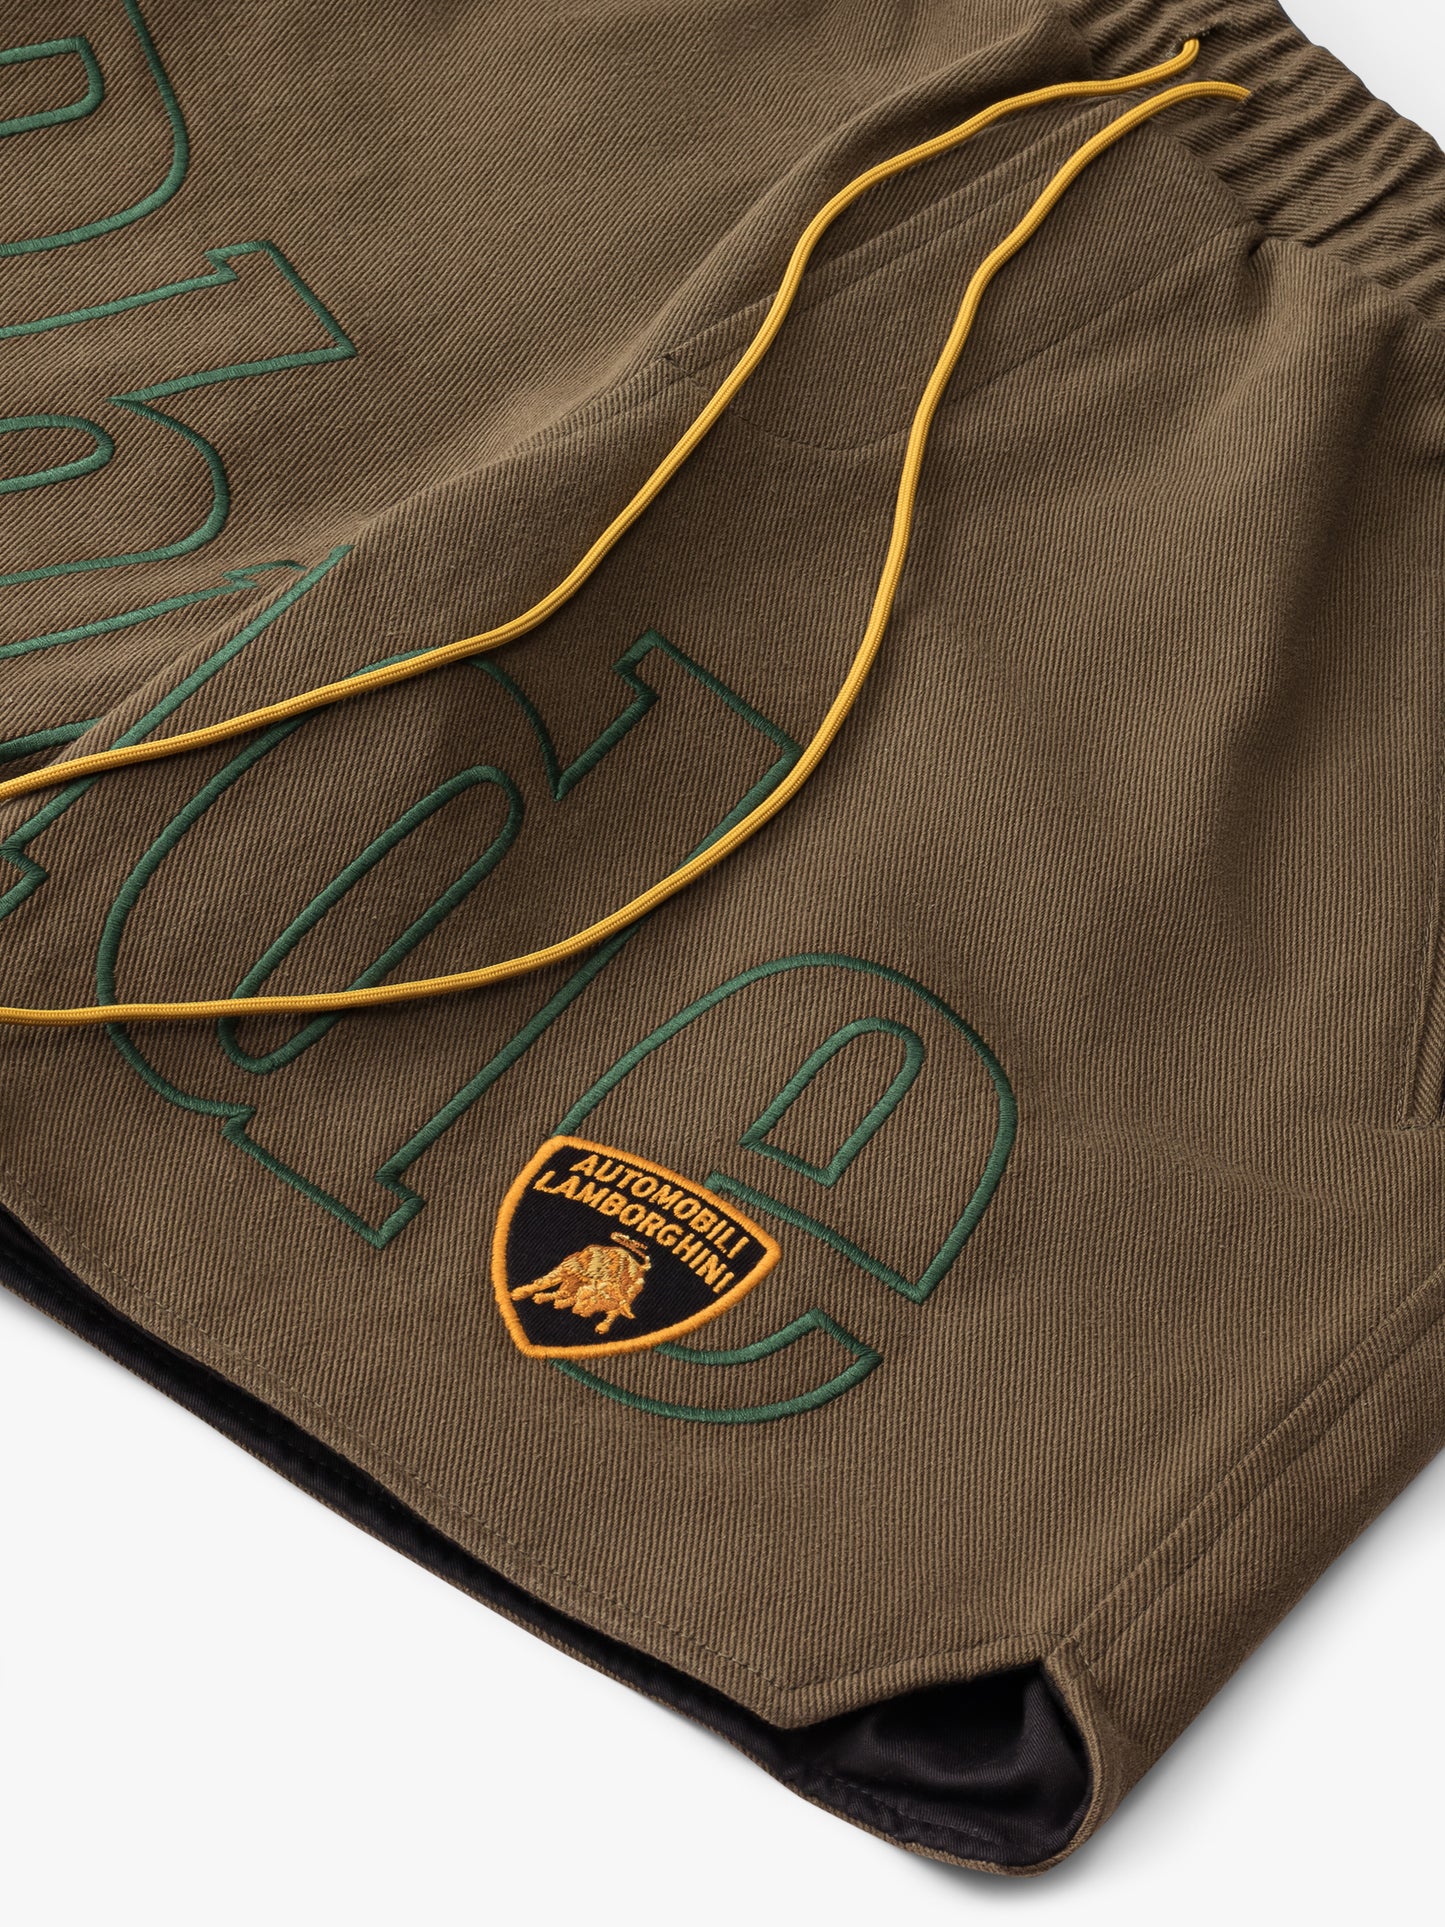 MILITARY TWILL EMBROIDERED LOGO SHORTS